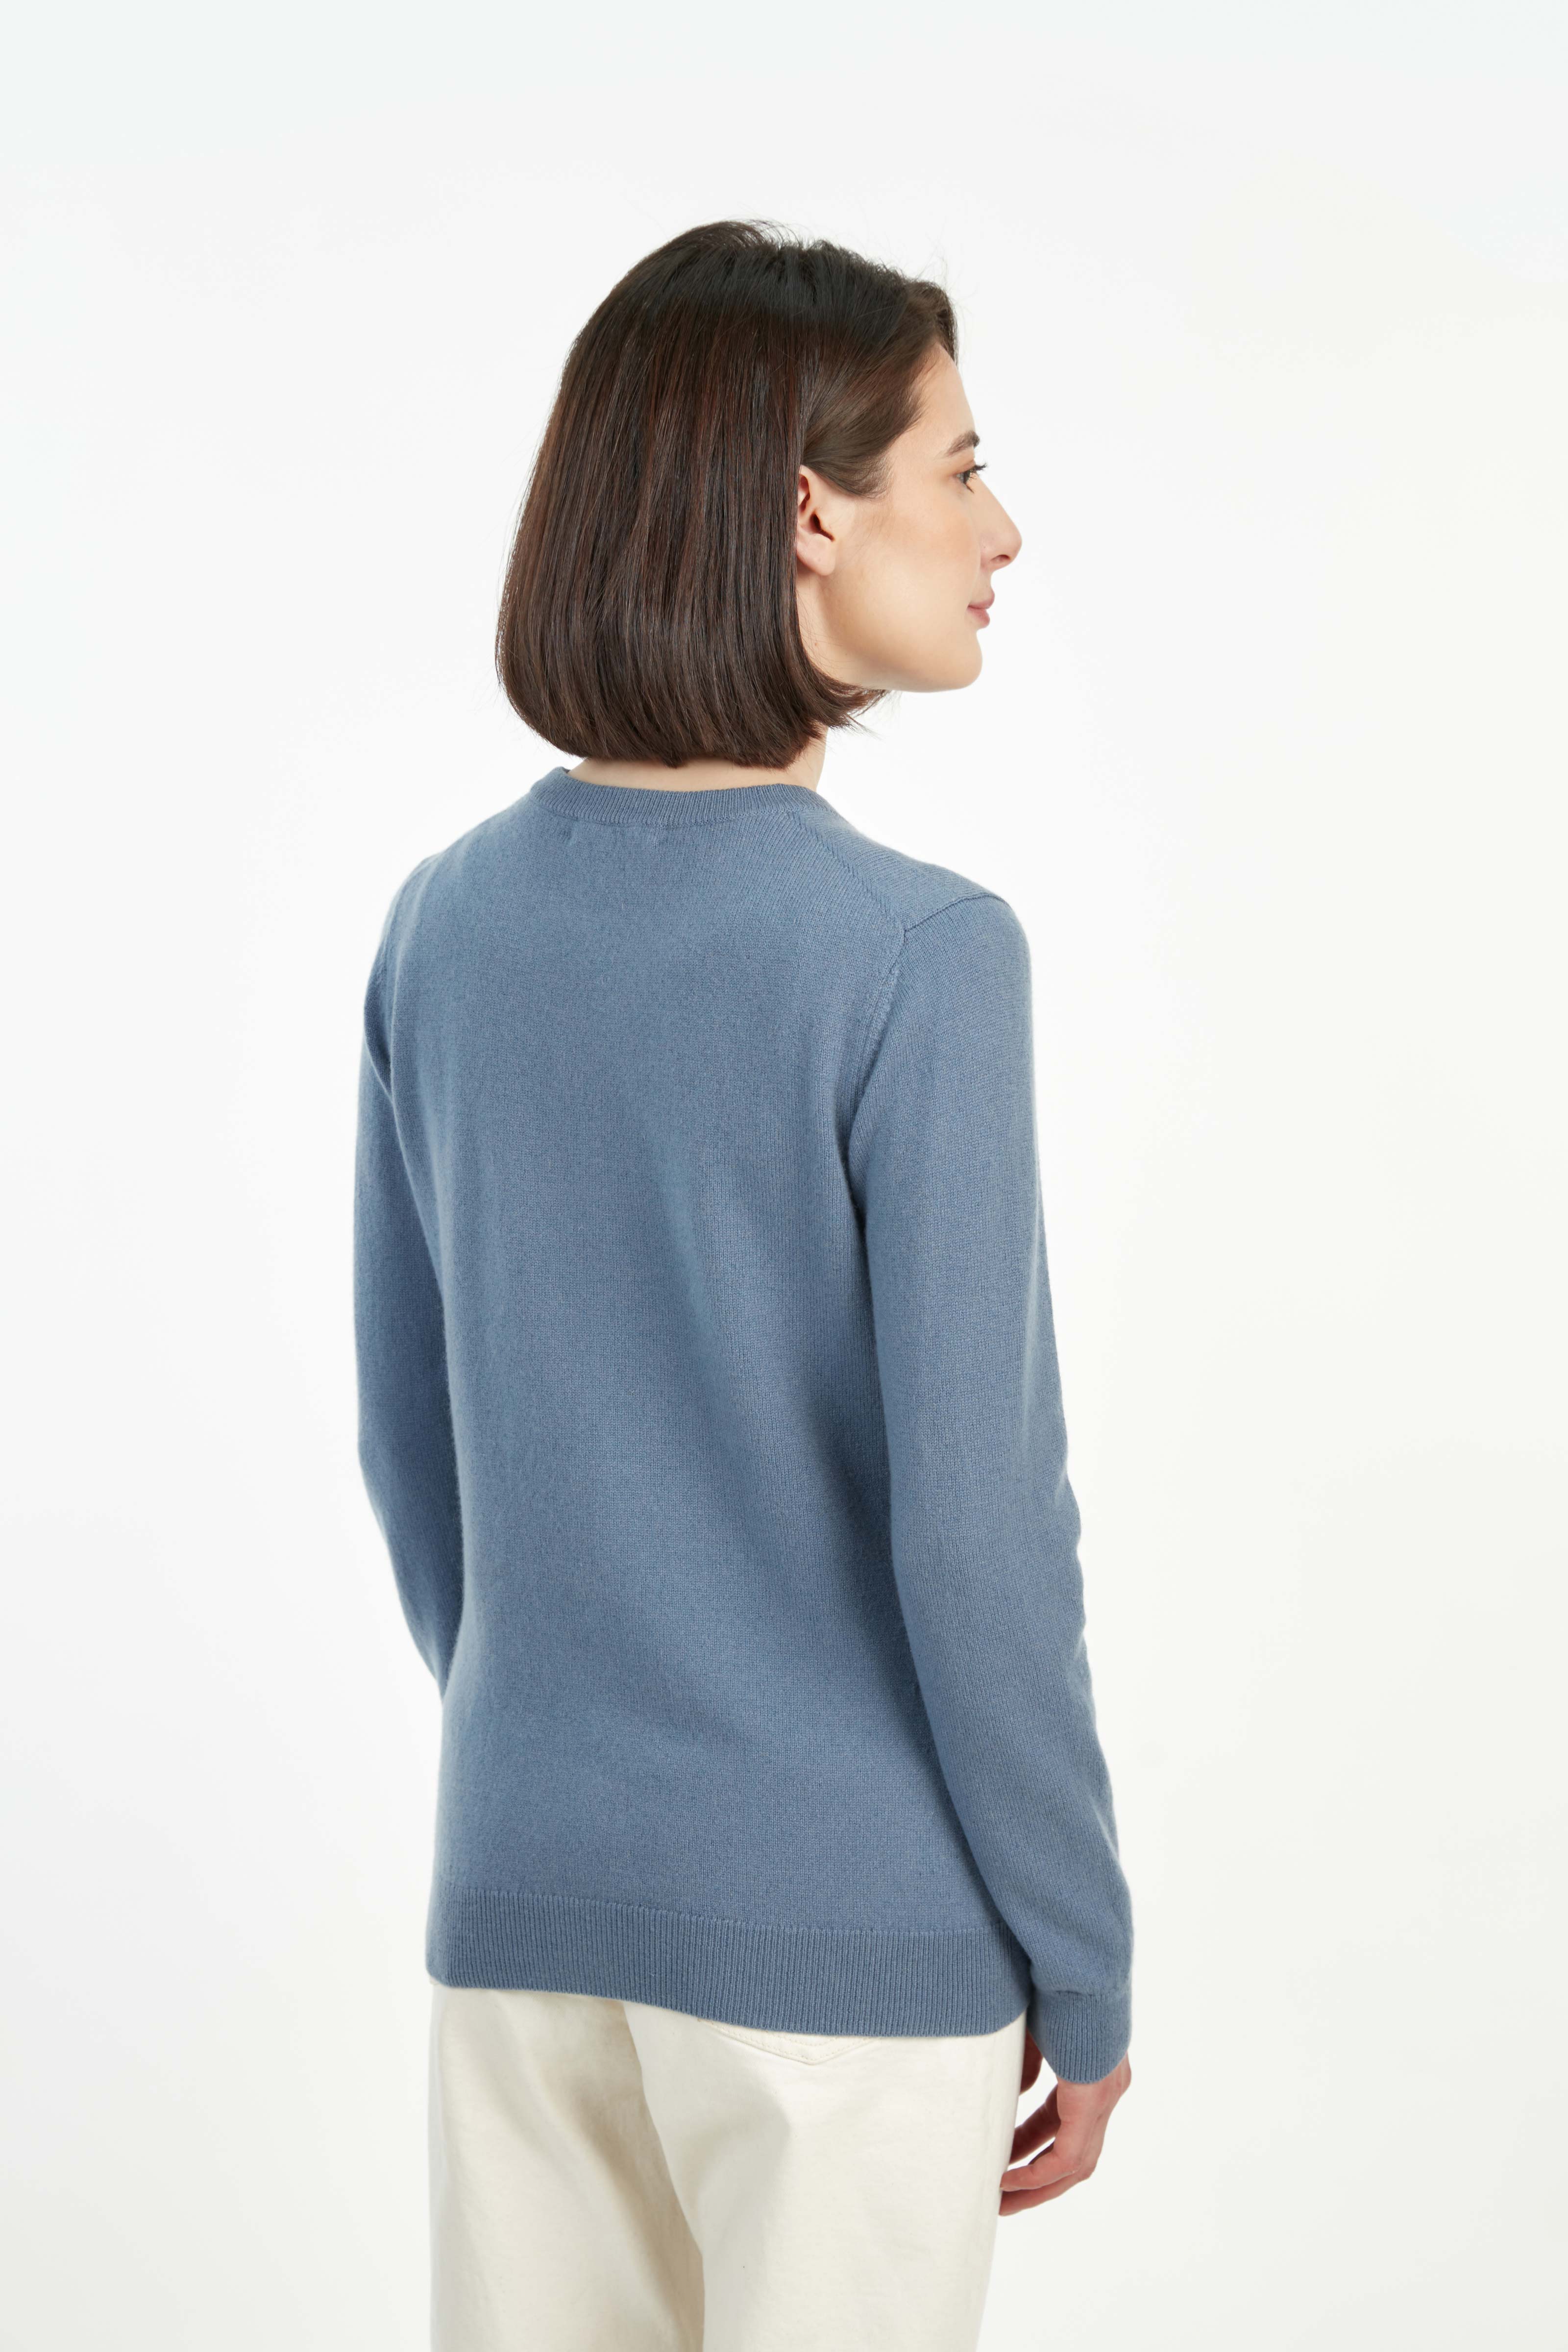 Women's Cashmere Intarsia Knitted Sweater Navy - Gobi Cashmere, S-M / Strong Blue / UK39-1323/546/1743/755/1437/1534